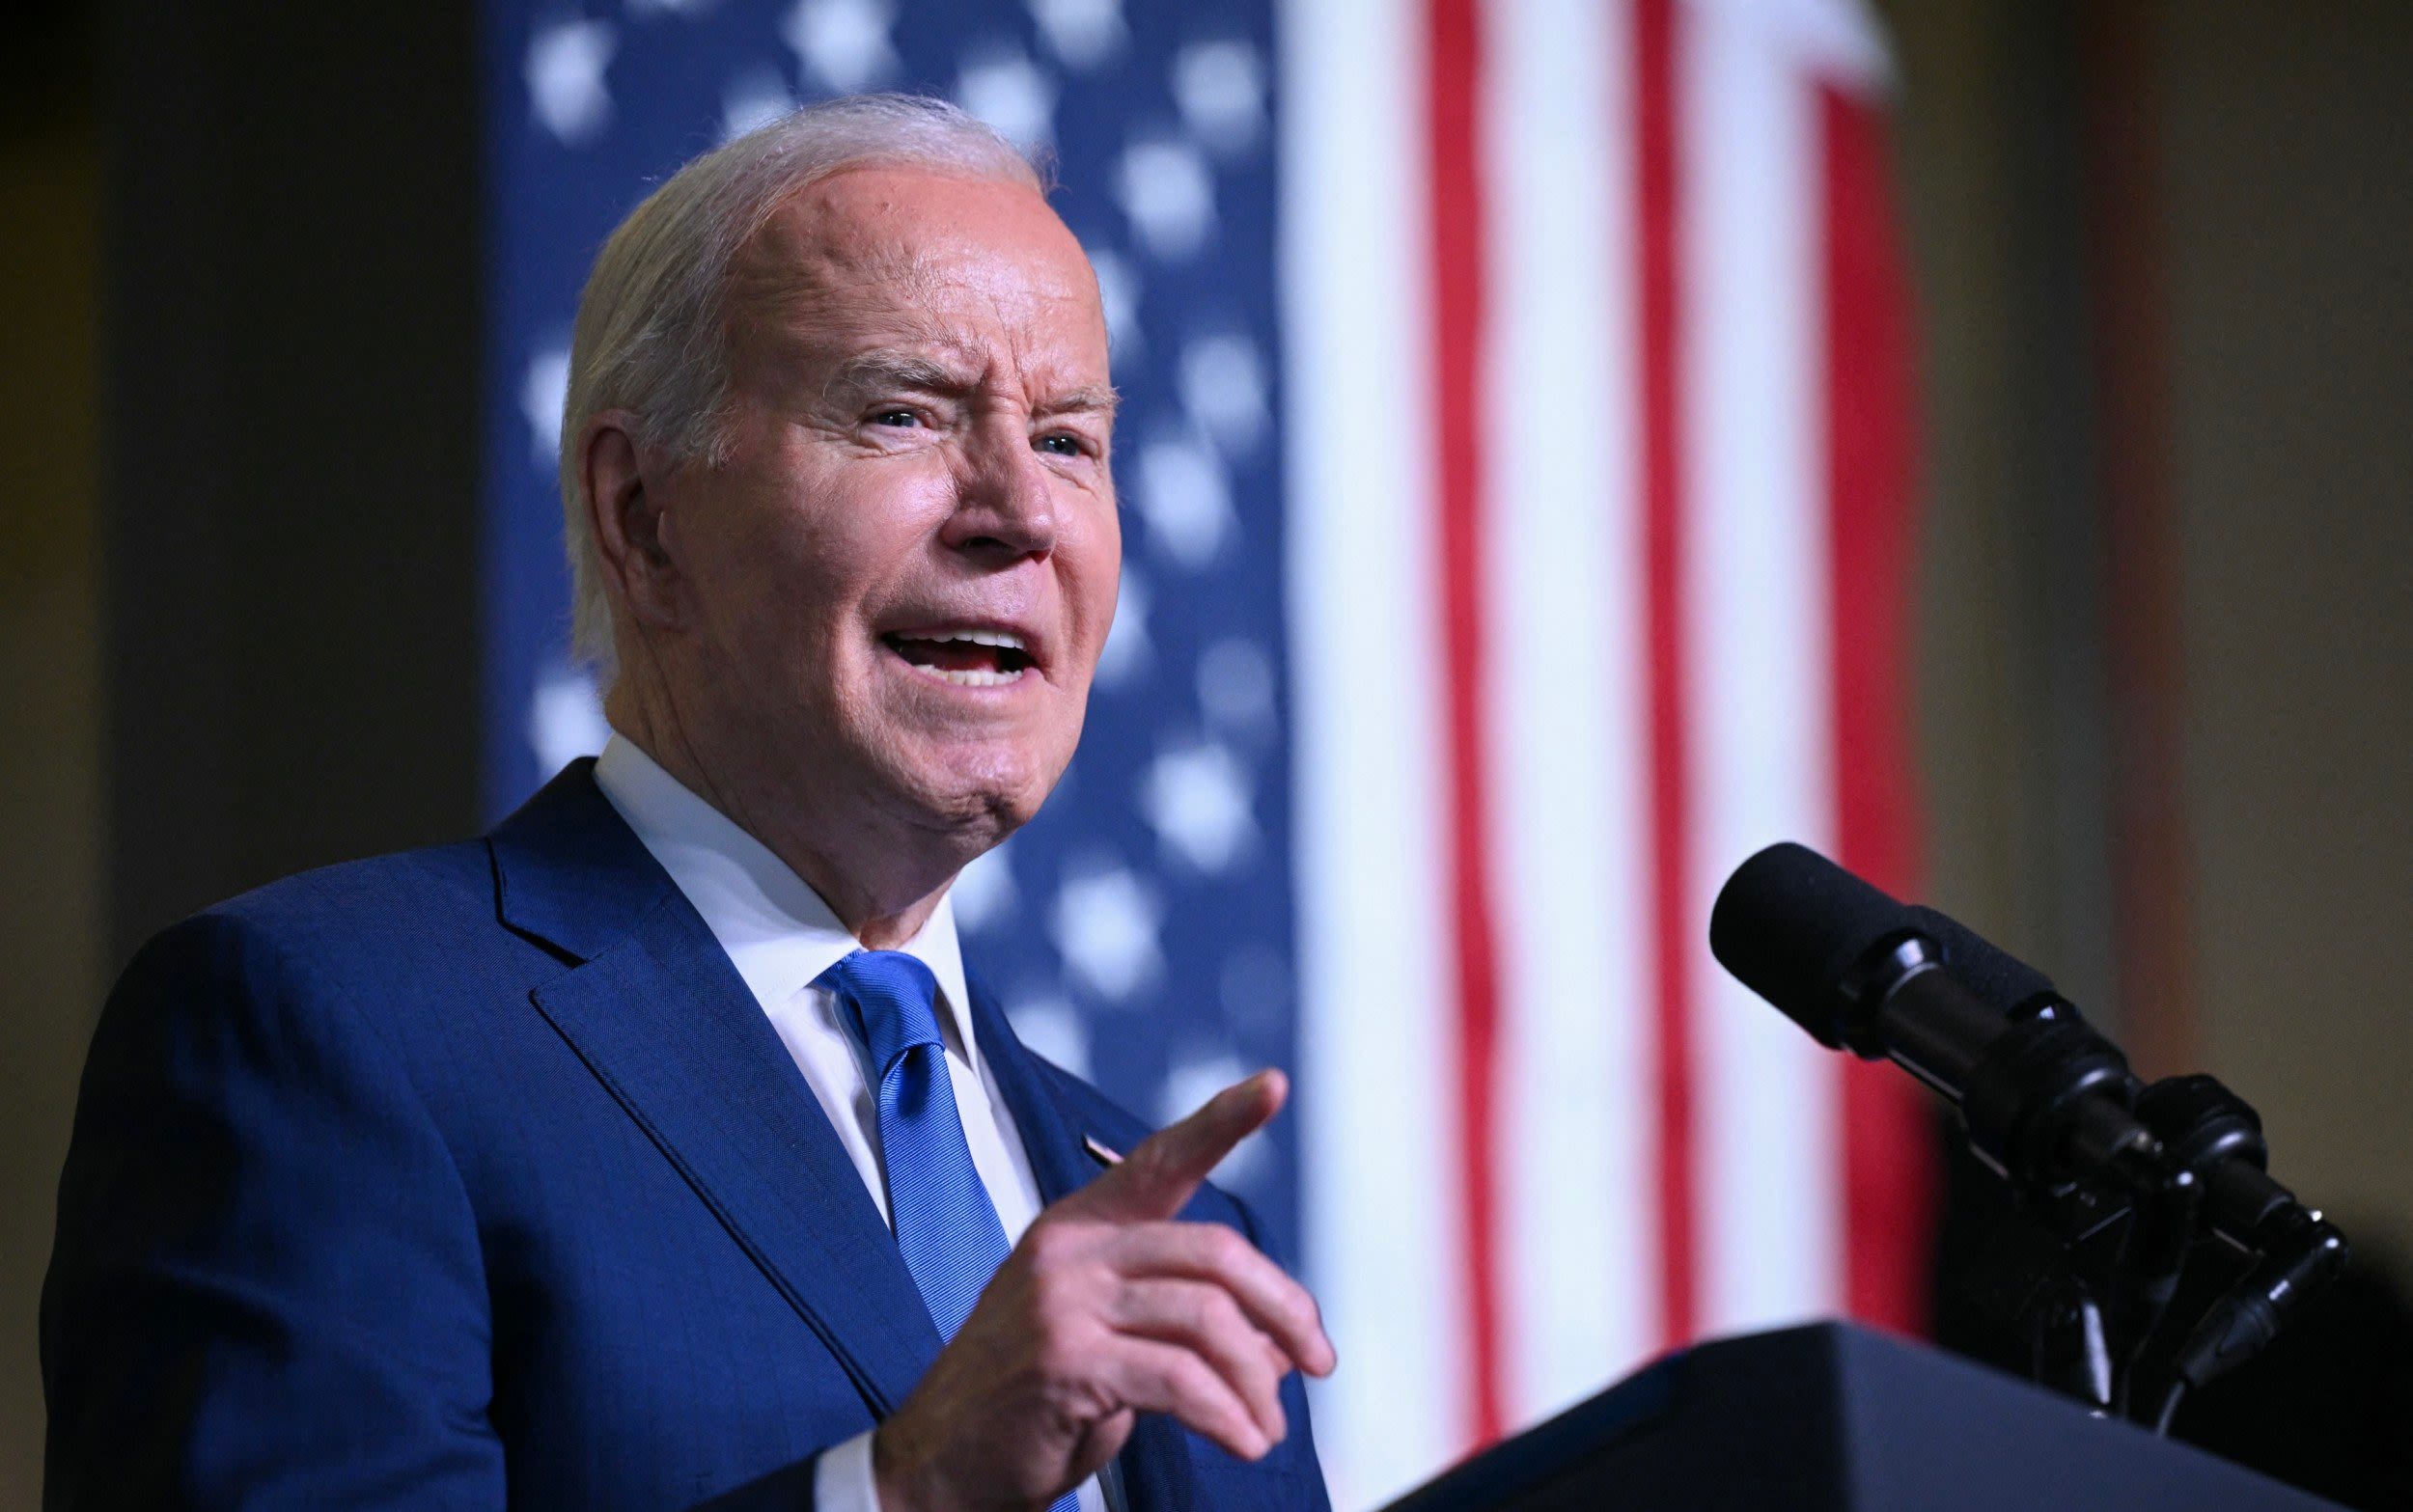 Biden can’t afford to alienate more allies